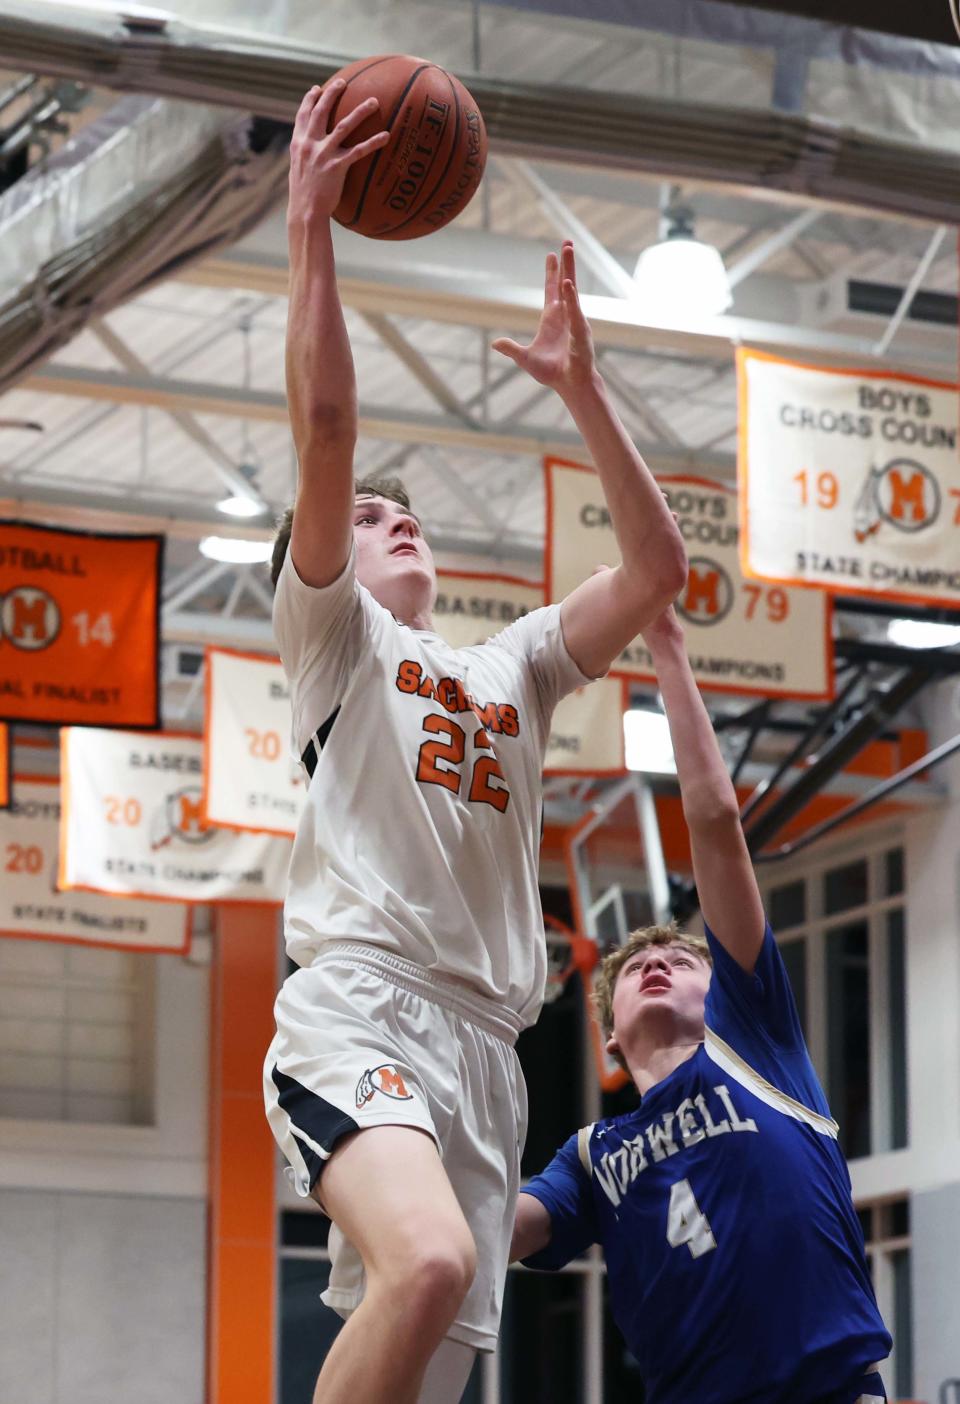 Middleboro's Matt Youngquist scores a basket on Norwell defender Ronan Coffey  during a game on Friday, Feb. 3, 2023.